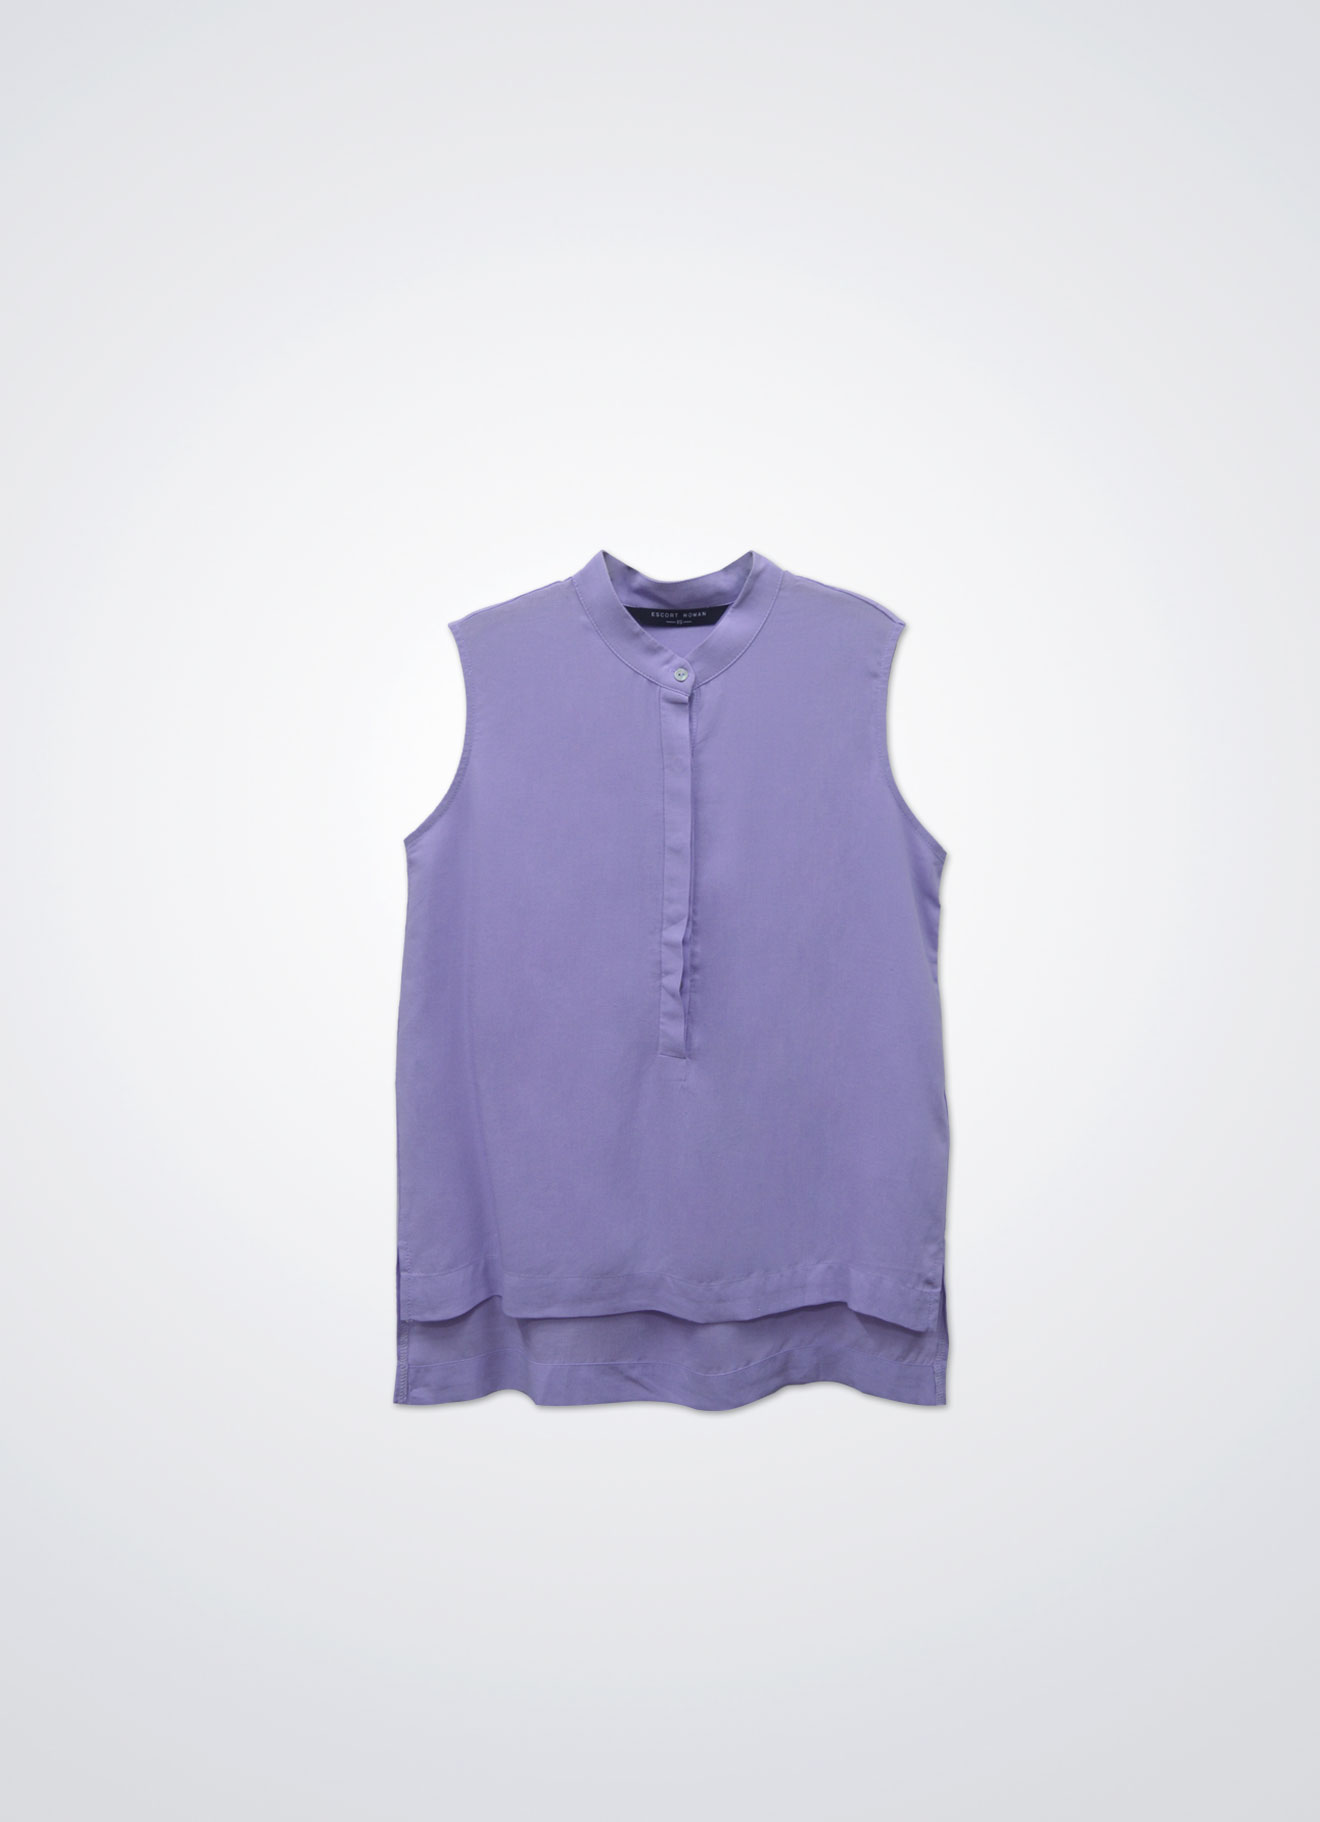 Orchid-Bloom by Sleeveless Top